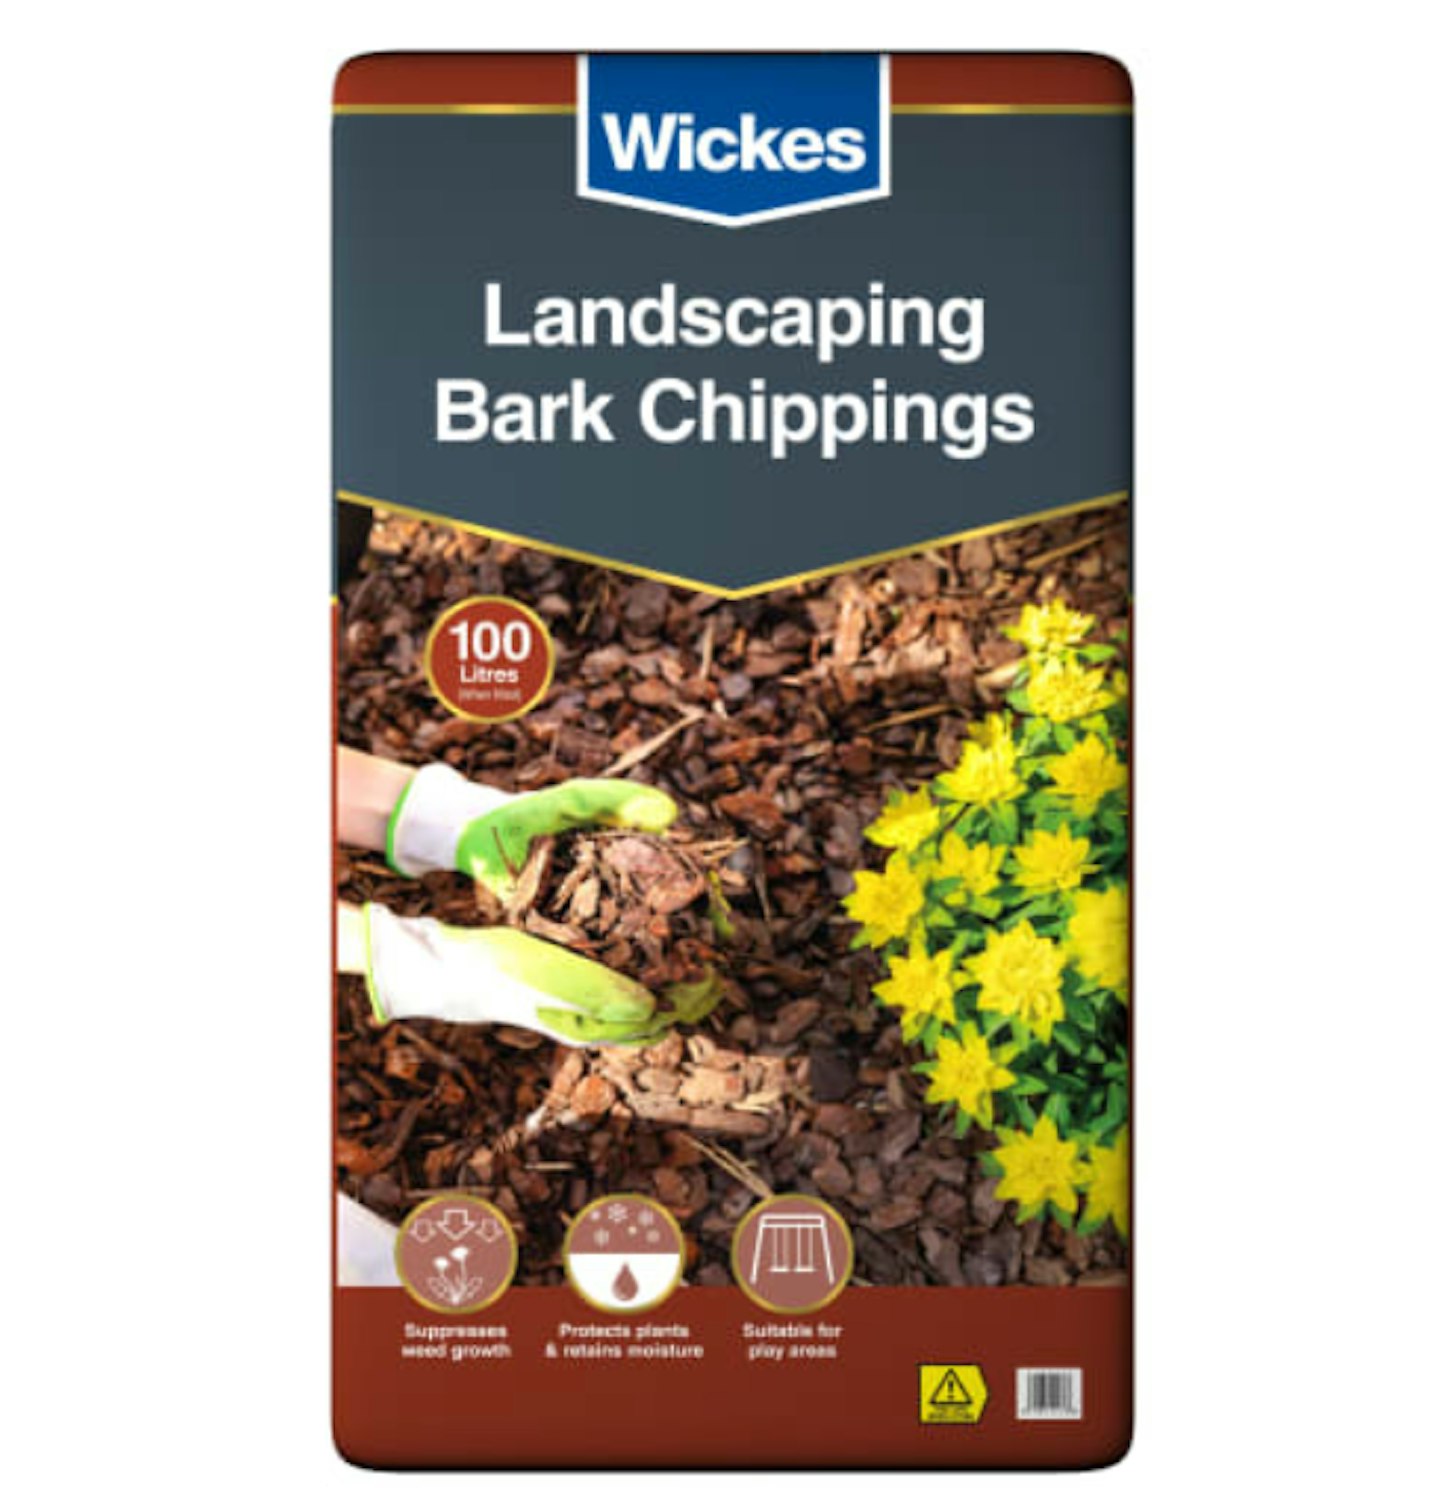 Wickes Bark Chippings - 100L